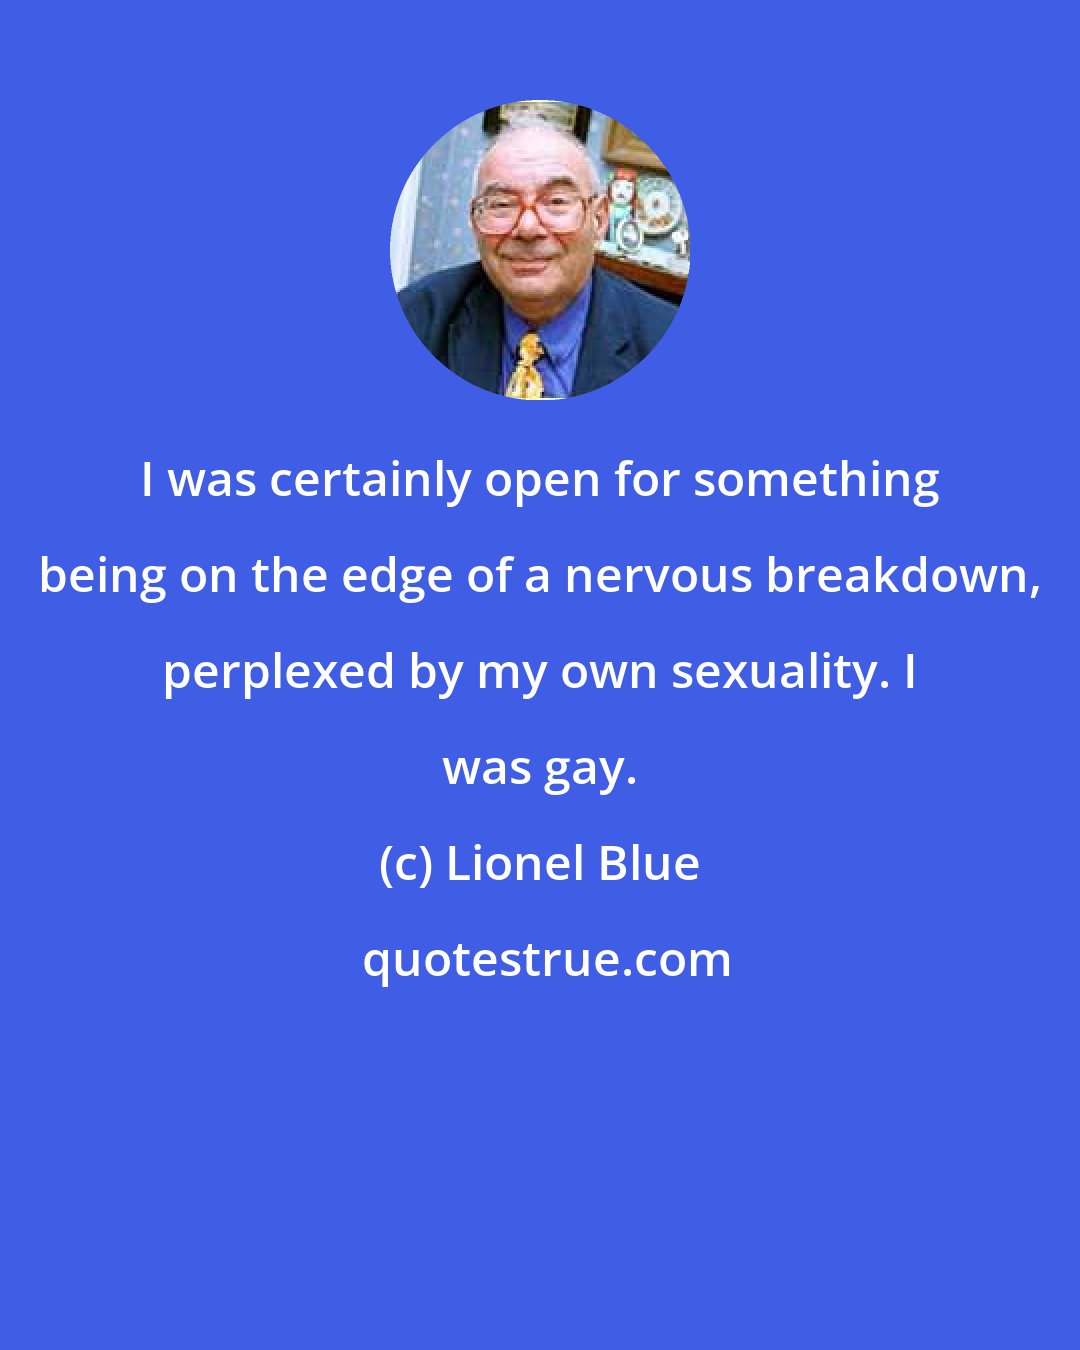 Lionel Blue: I was certainly open for something being on the edge of a nervous breakdown, perplexed by my own sexuality. I was gay.